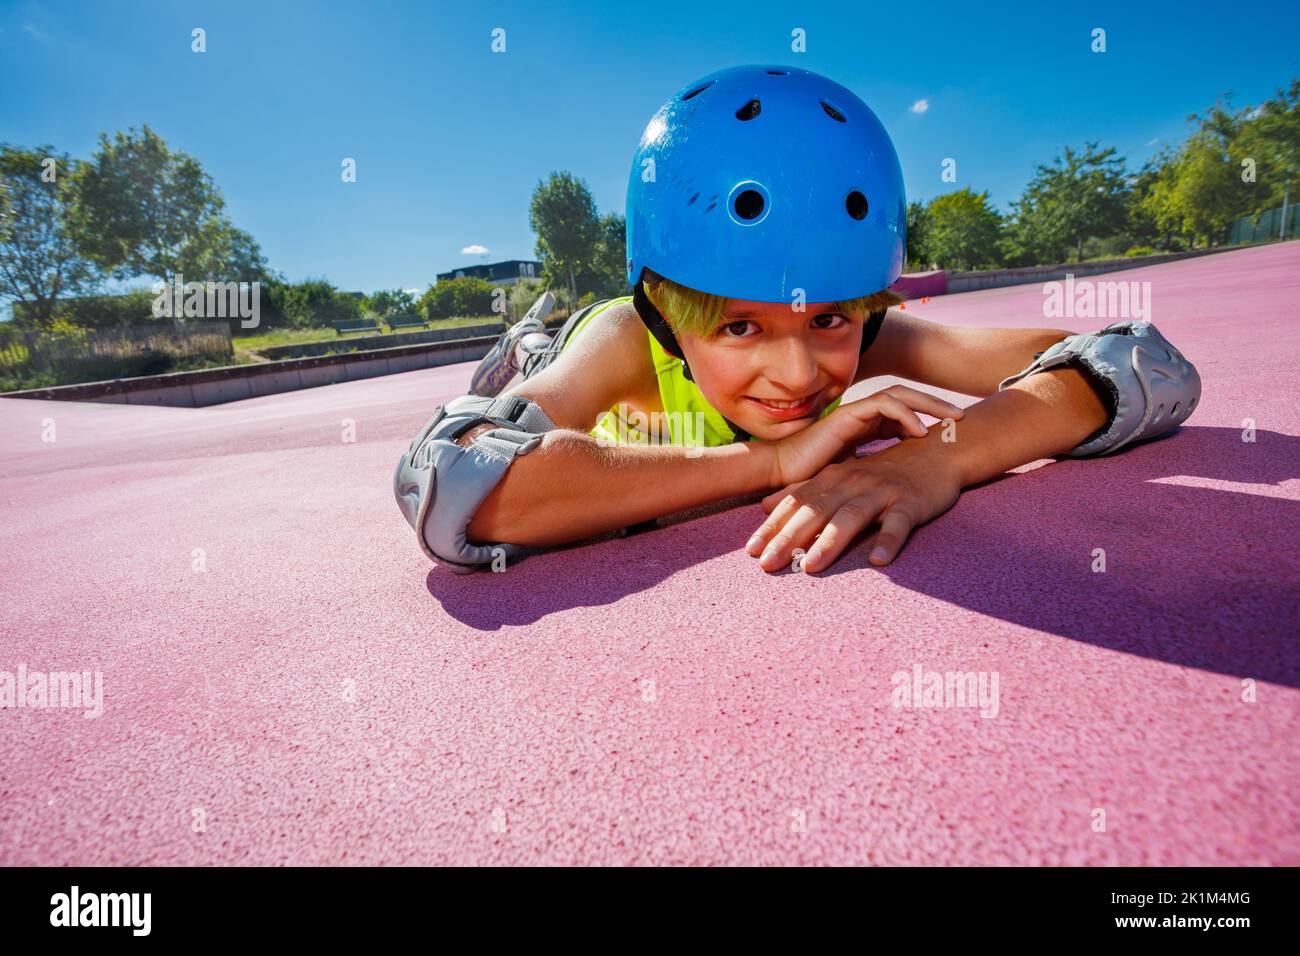 Boy in rollerblades at skatepark rest on color surface smiling Stock Photo